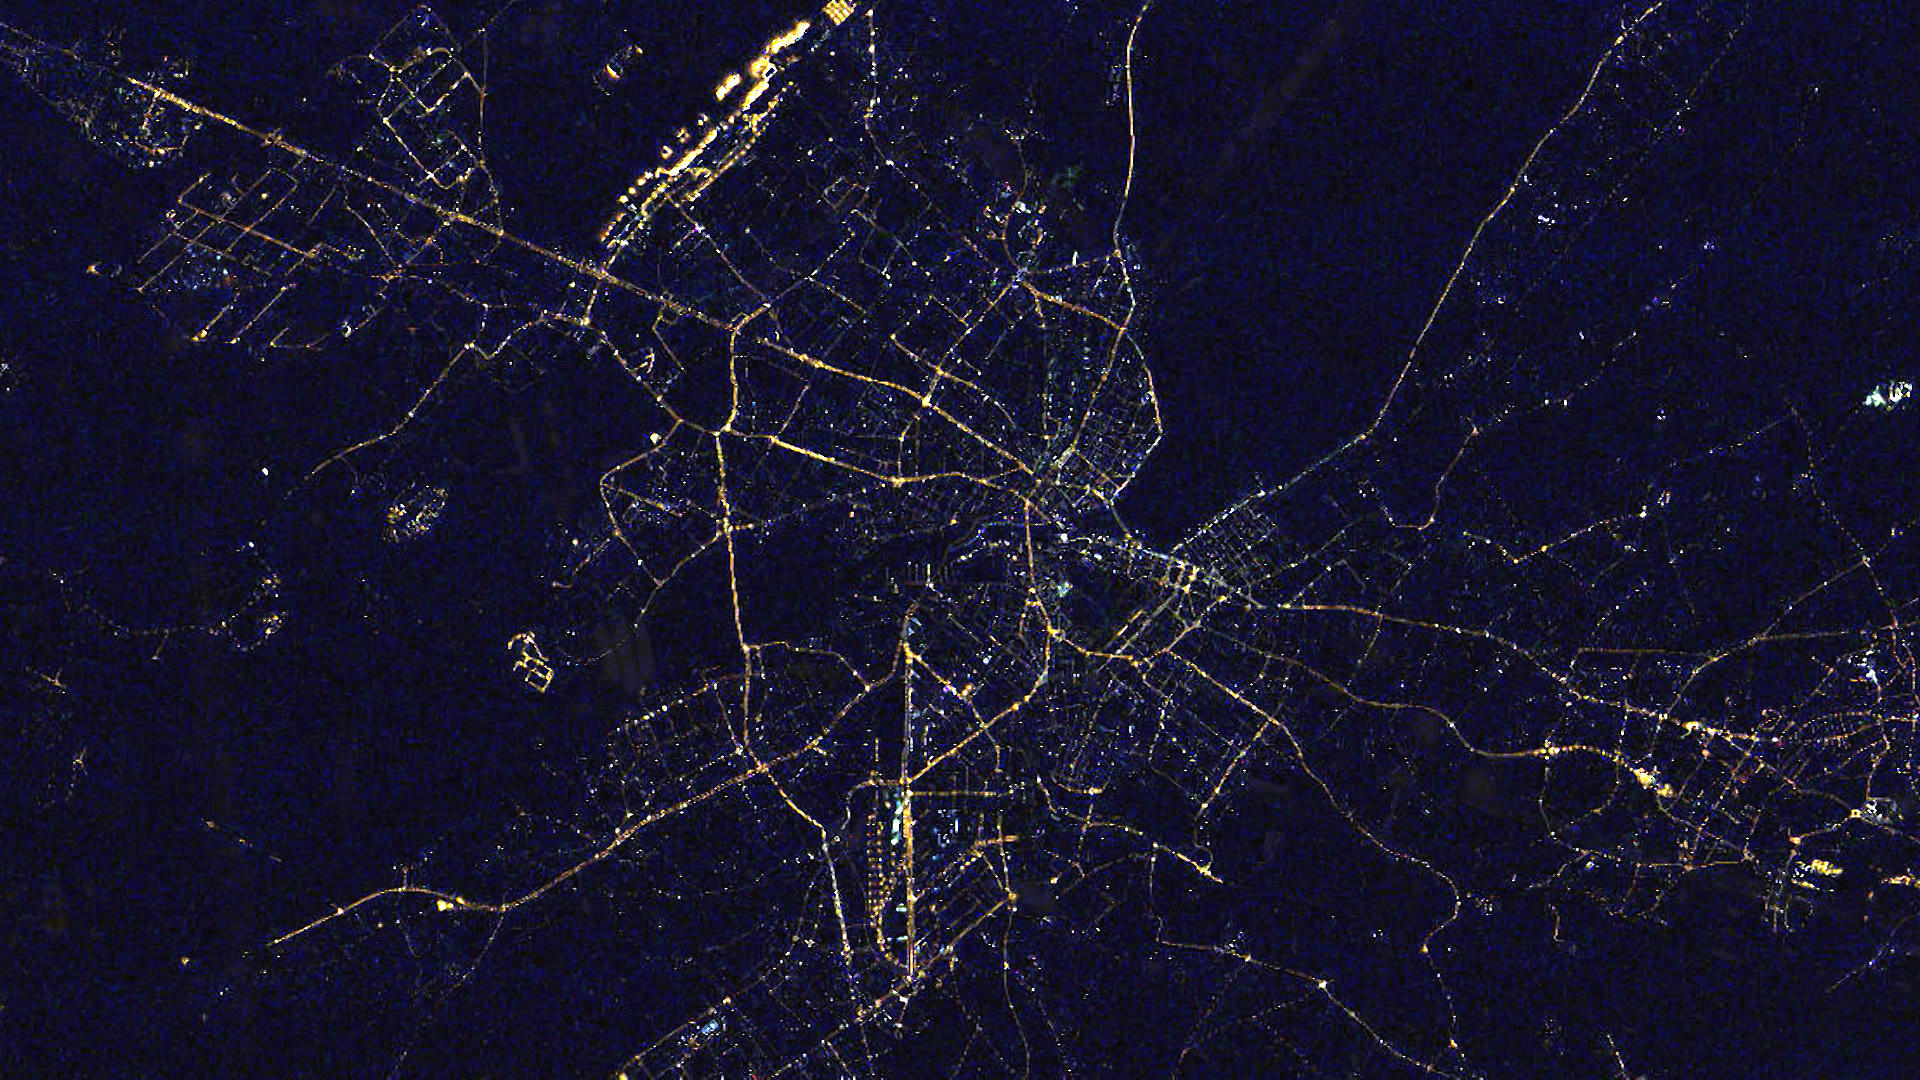 Aerial photograph of an urban region by night